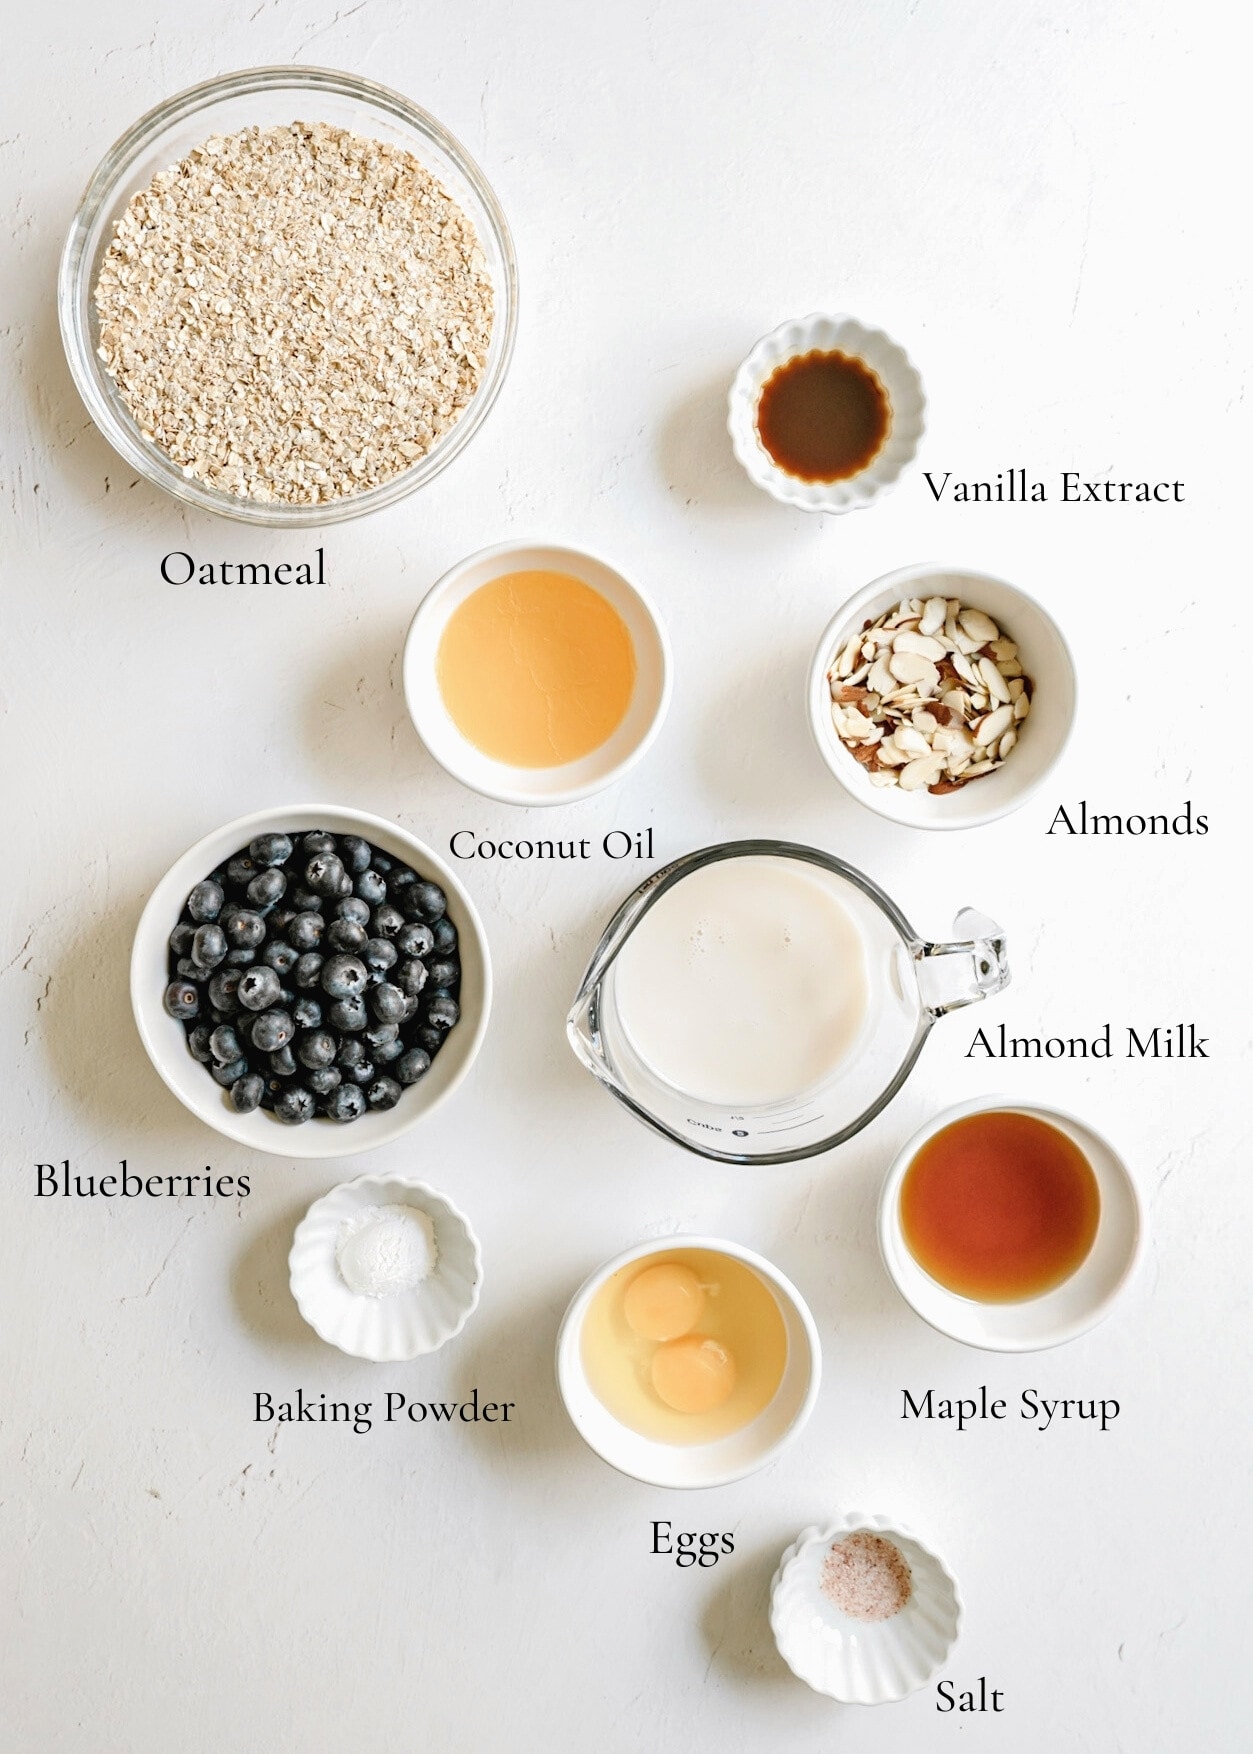 A photo of the various ingredients used to make the baked oatmeal. Ingredients include oatmeal, vanilla extract, coconut oil, almonds, almond milk, blueberries, baking powder, eggs, maple syrup, and salt.